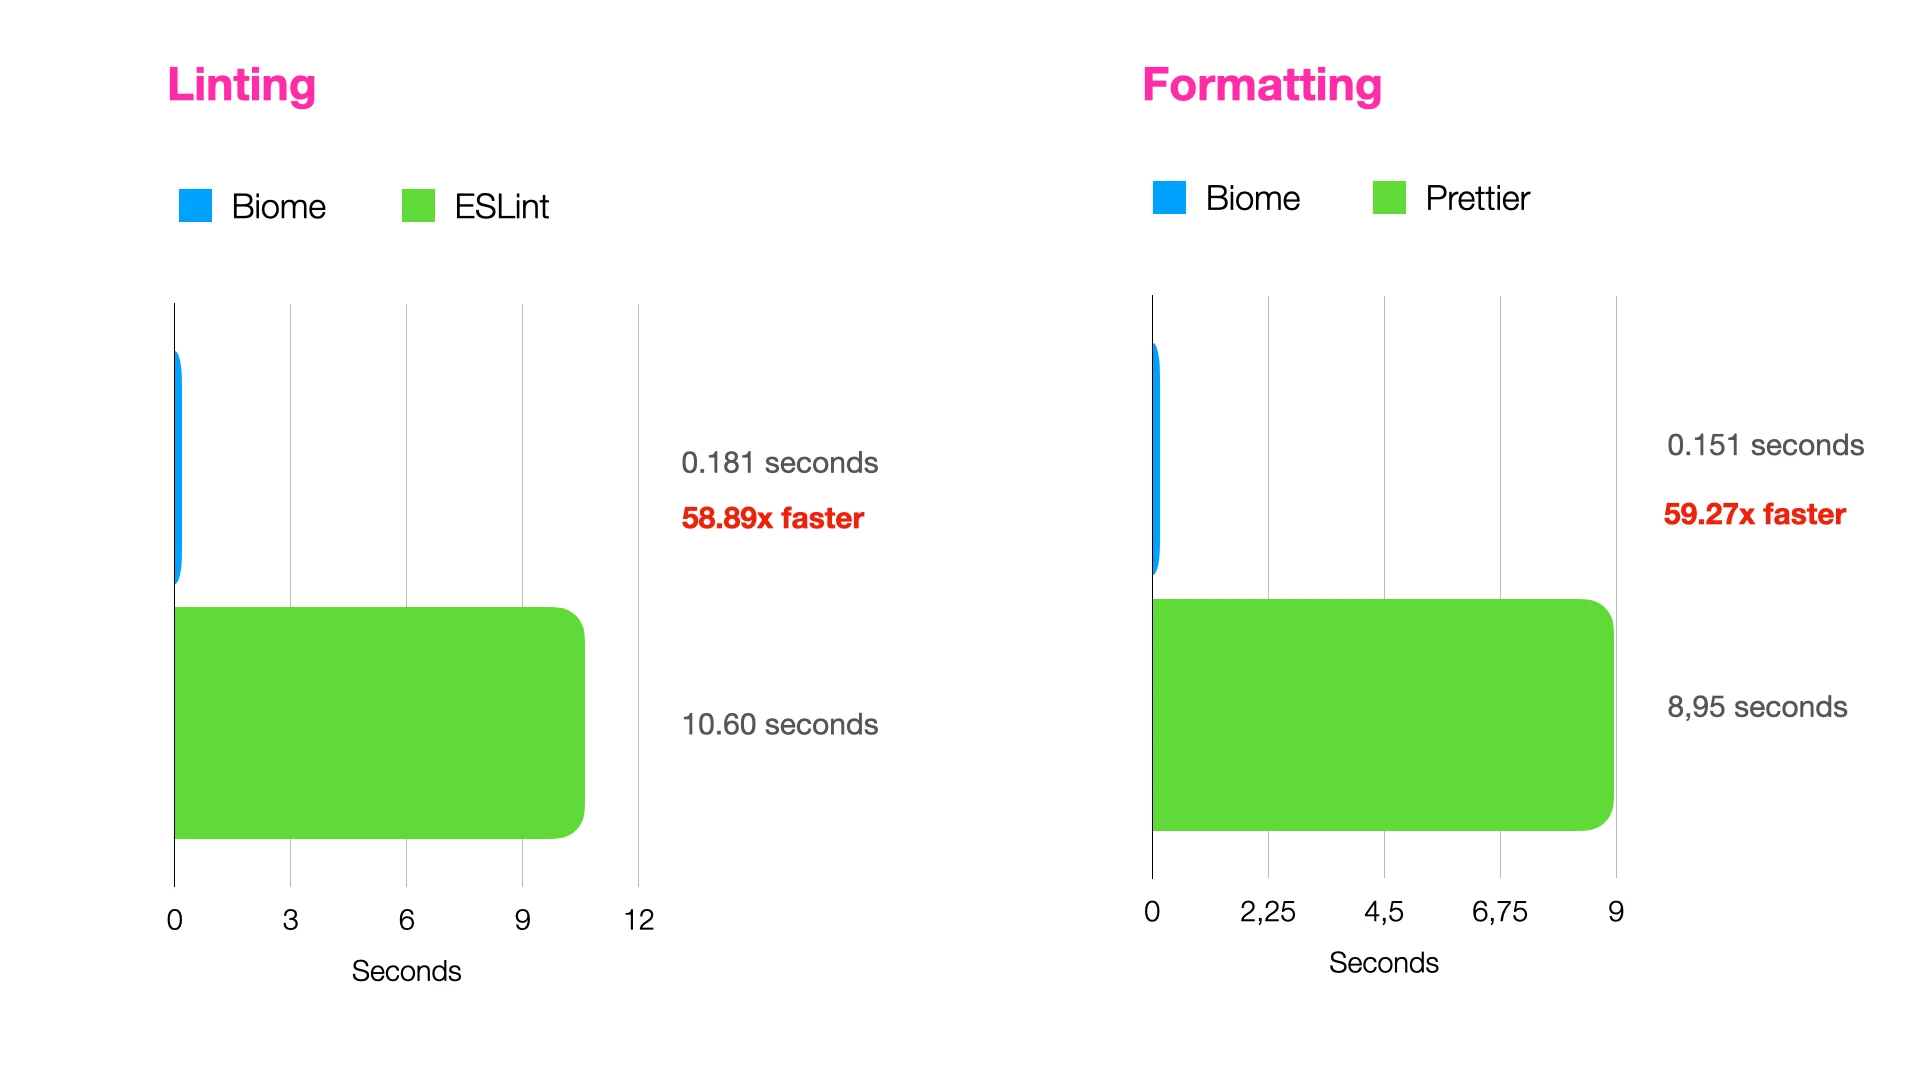 Two diagrams visualizing the performance measurements of linting and formatting between ESLint & Prettier versus Biome. The results are: Linting - eslint = 10.60 seconds, Biome = 0.181 seconds. Biome lints 58.89 times faster than ESLint. Formatting - Prettier = 8.95 seconds, Biome = 0.151 seconds. Biome formats 59.27 times faster than Prettier.